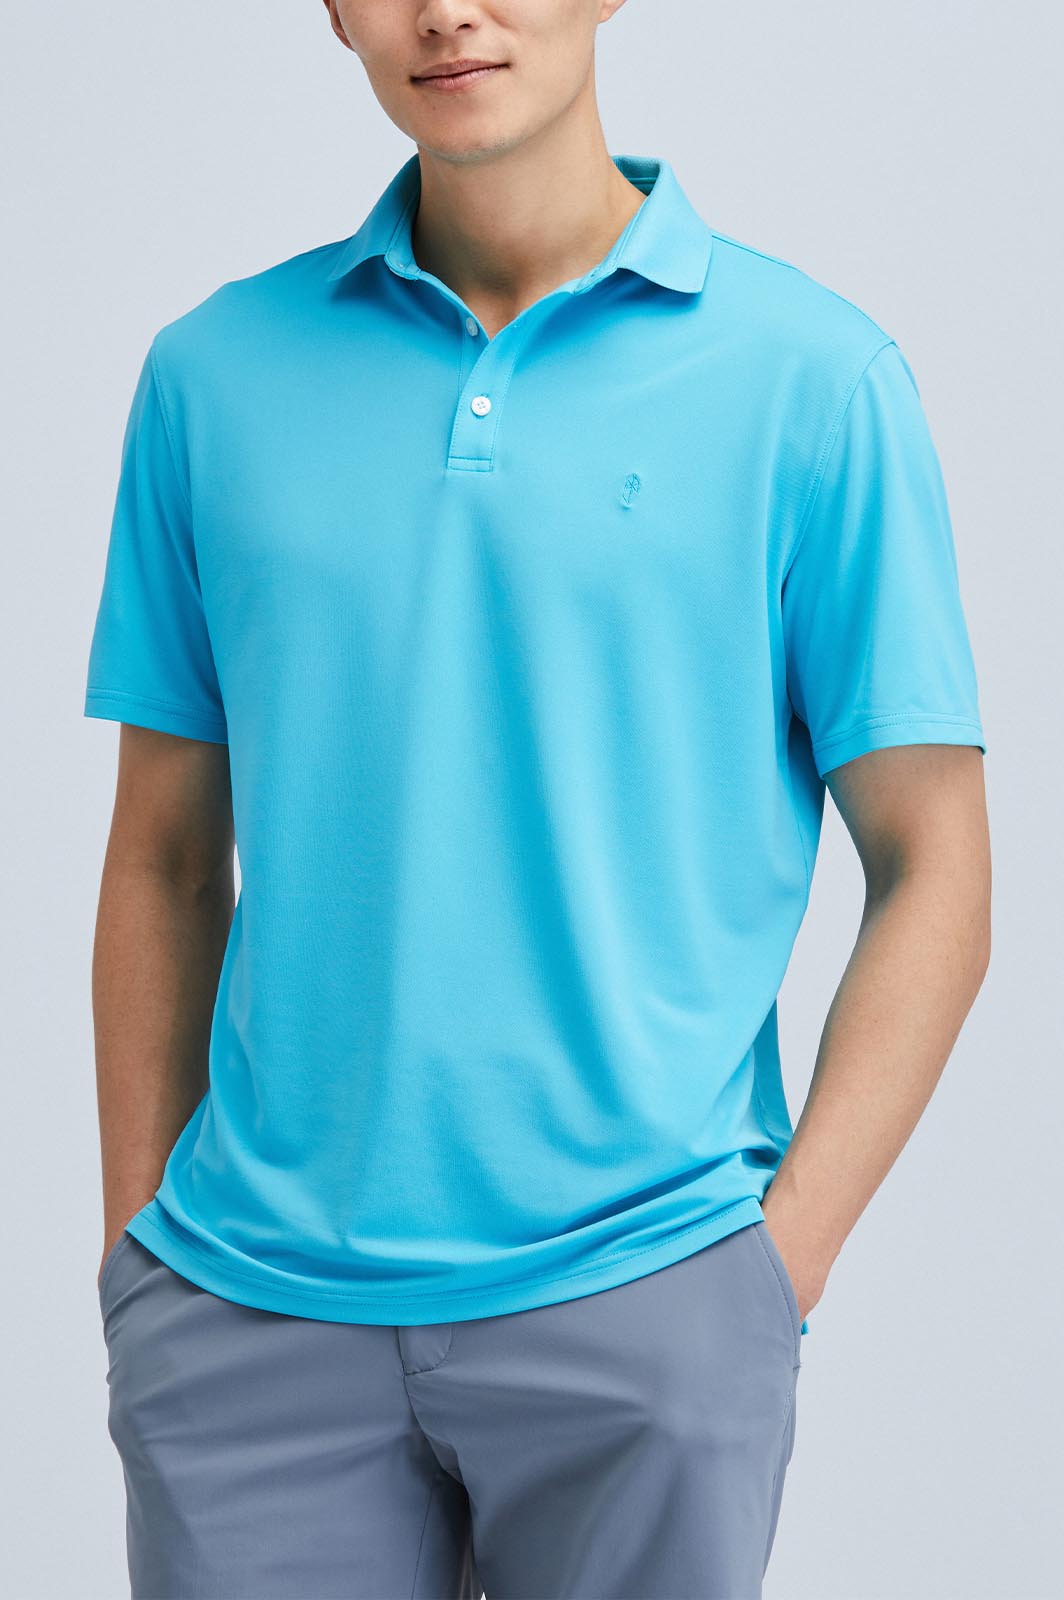 Oceaya Polo Classic Fit Turquoise